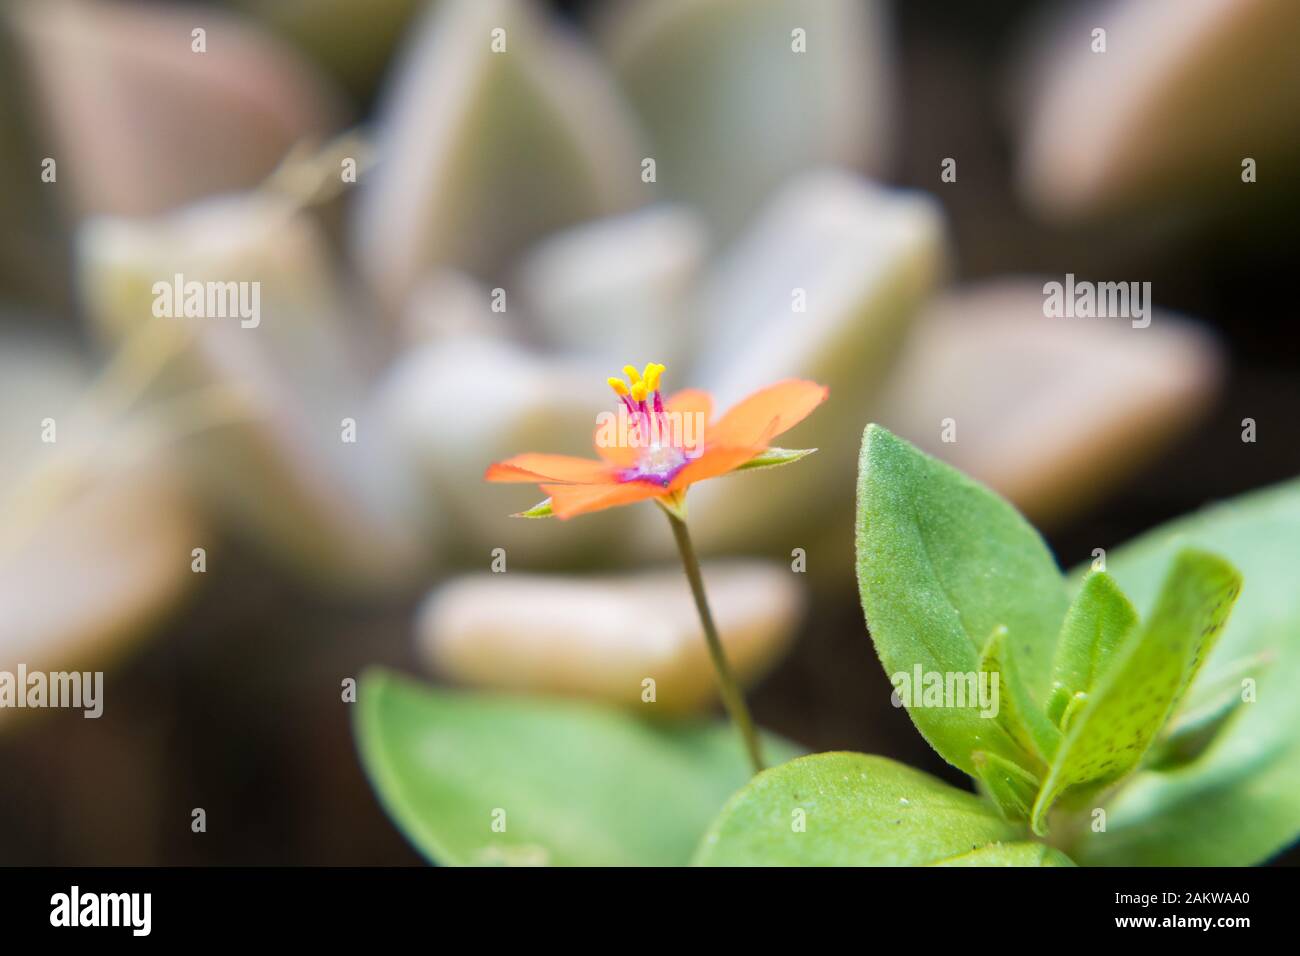 A small but hardy Anagallis blooms among succulents Stock Photo